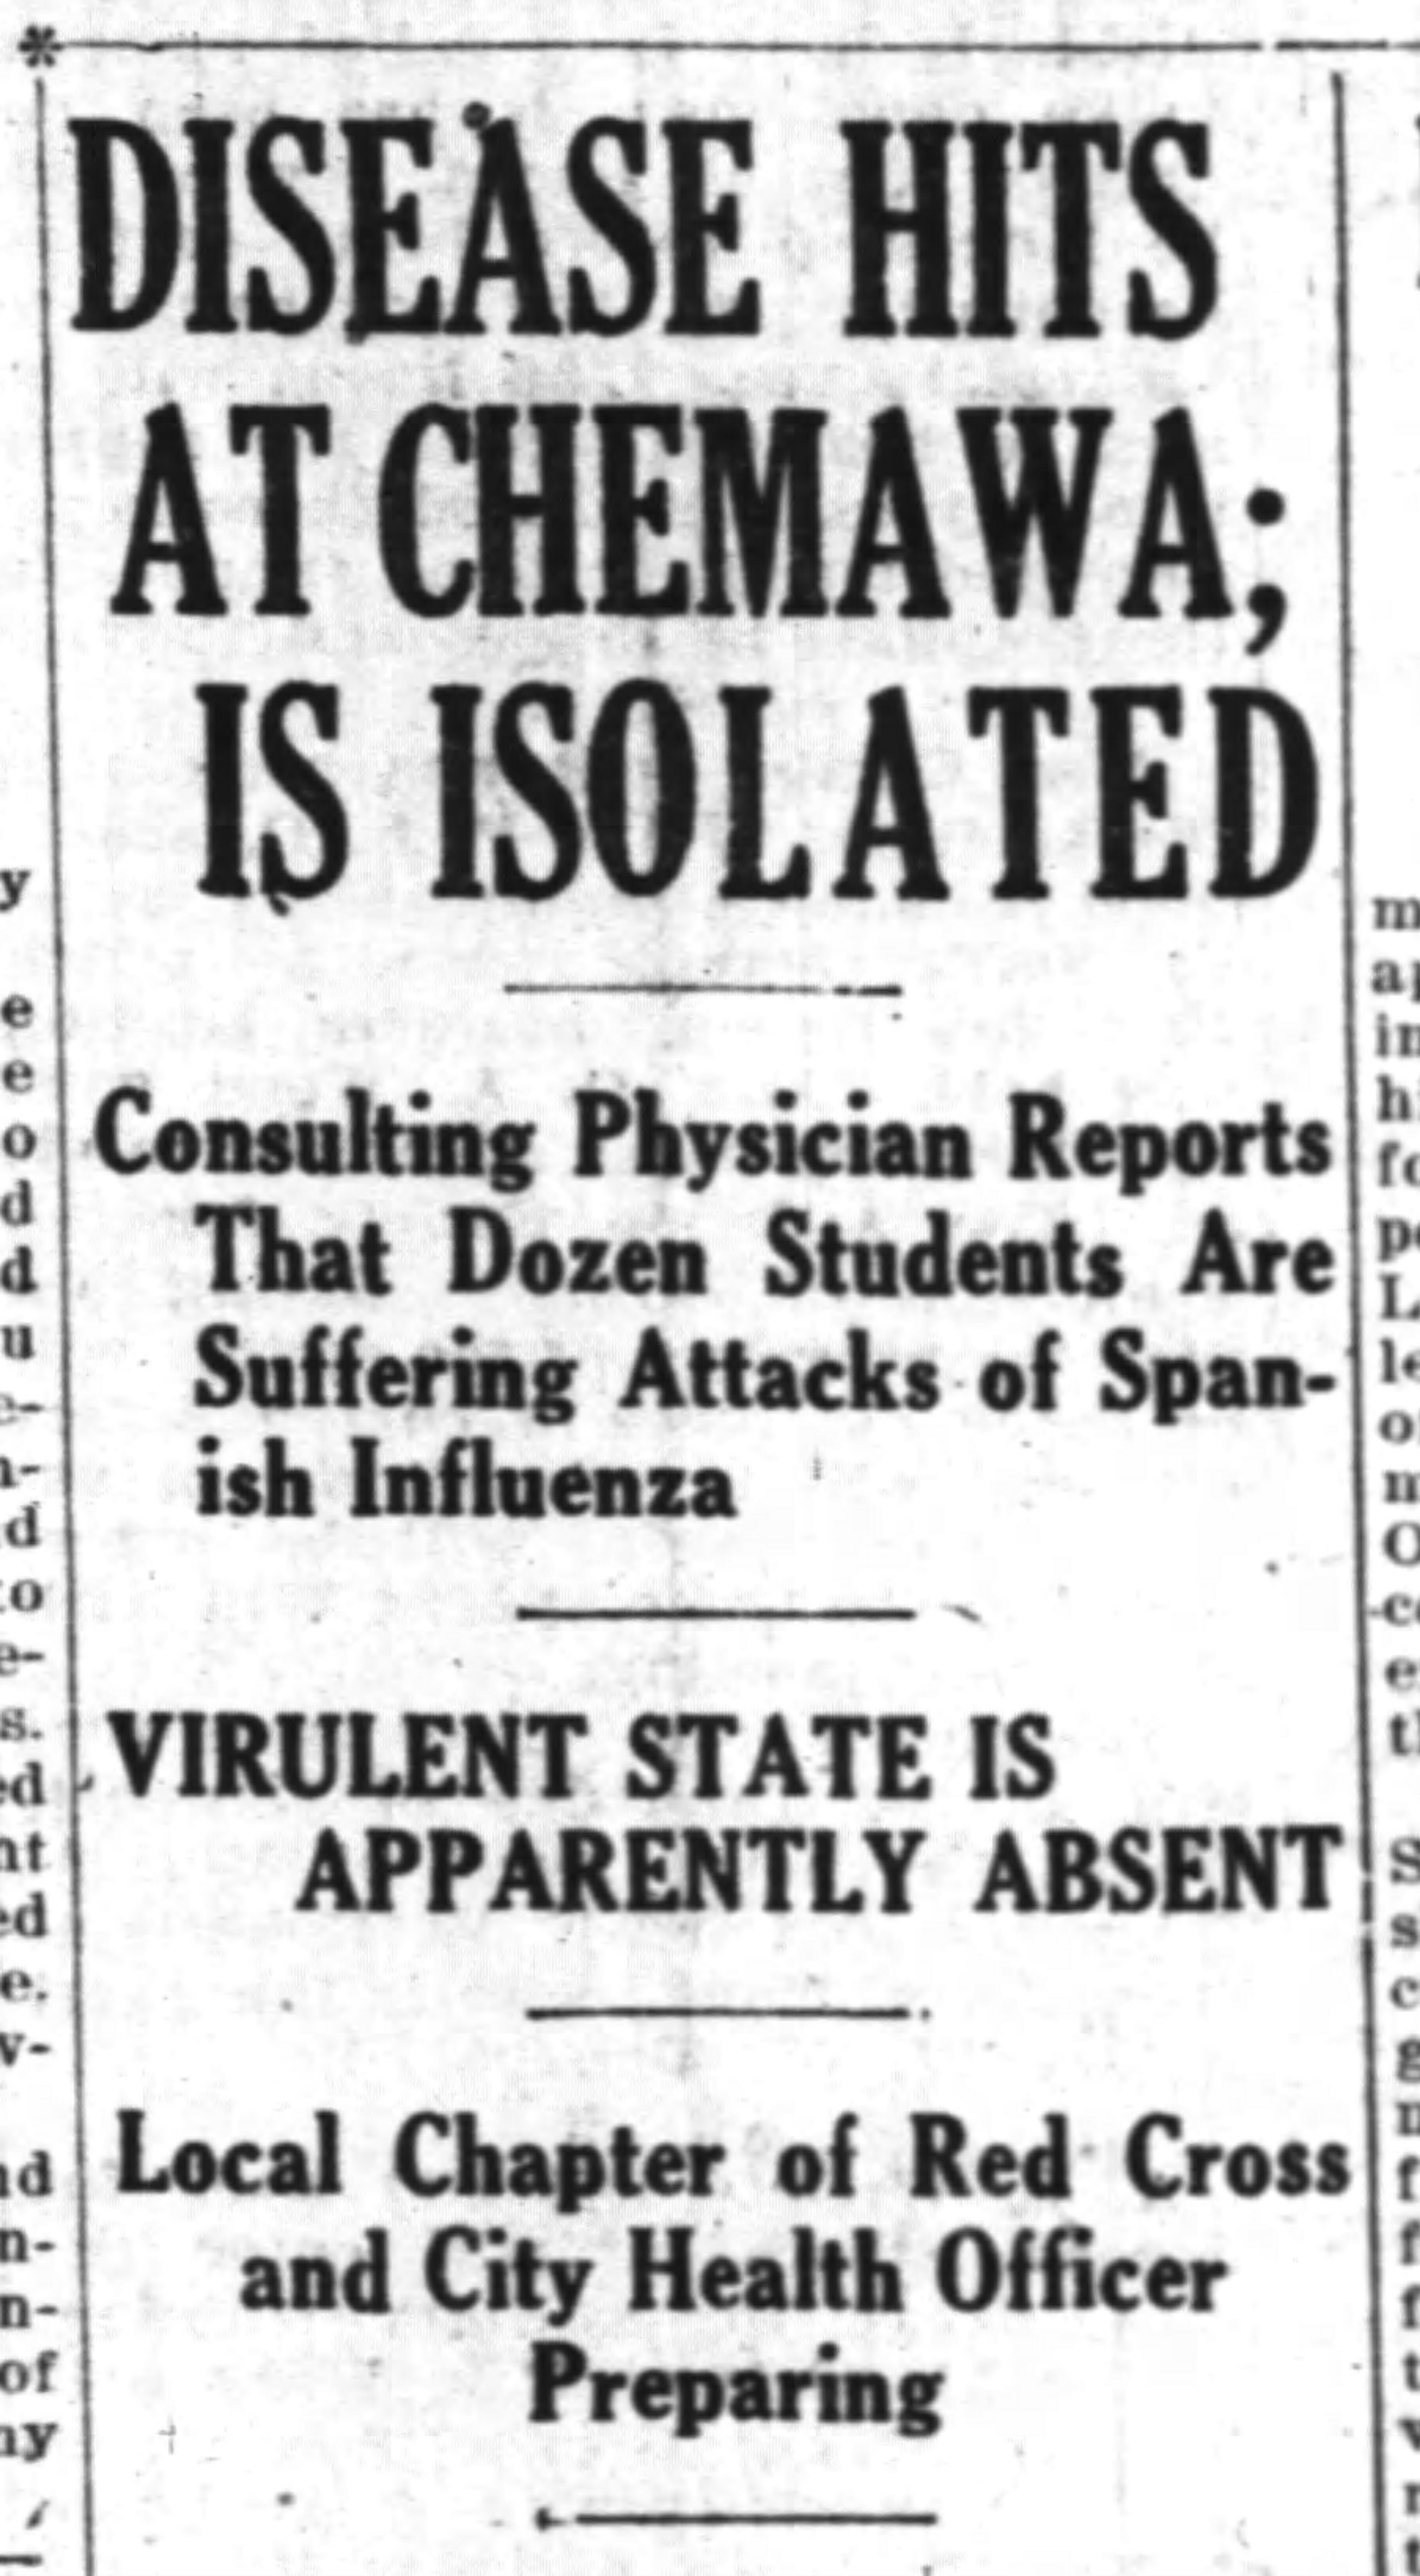 The Oregon Statesman reports multiple cases of Spanish influenza at the Chemawa Indian School on Oct. 9, 1918.